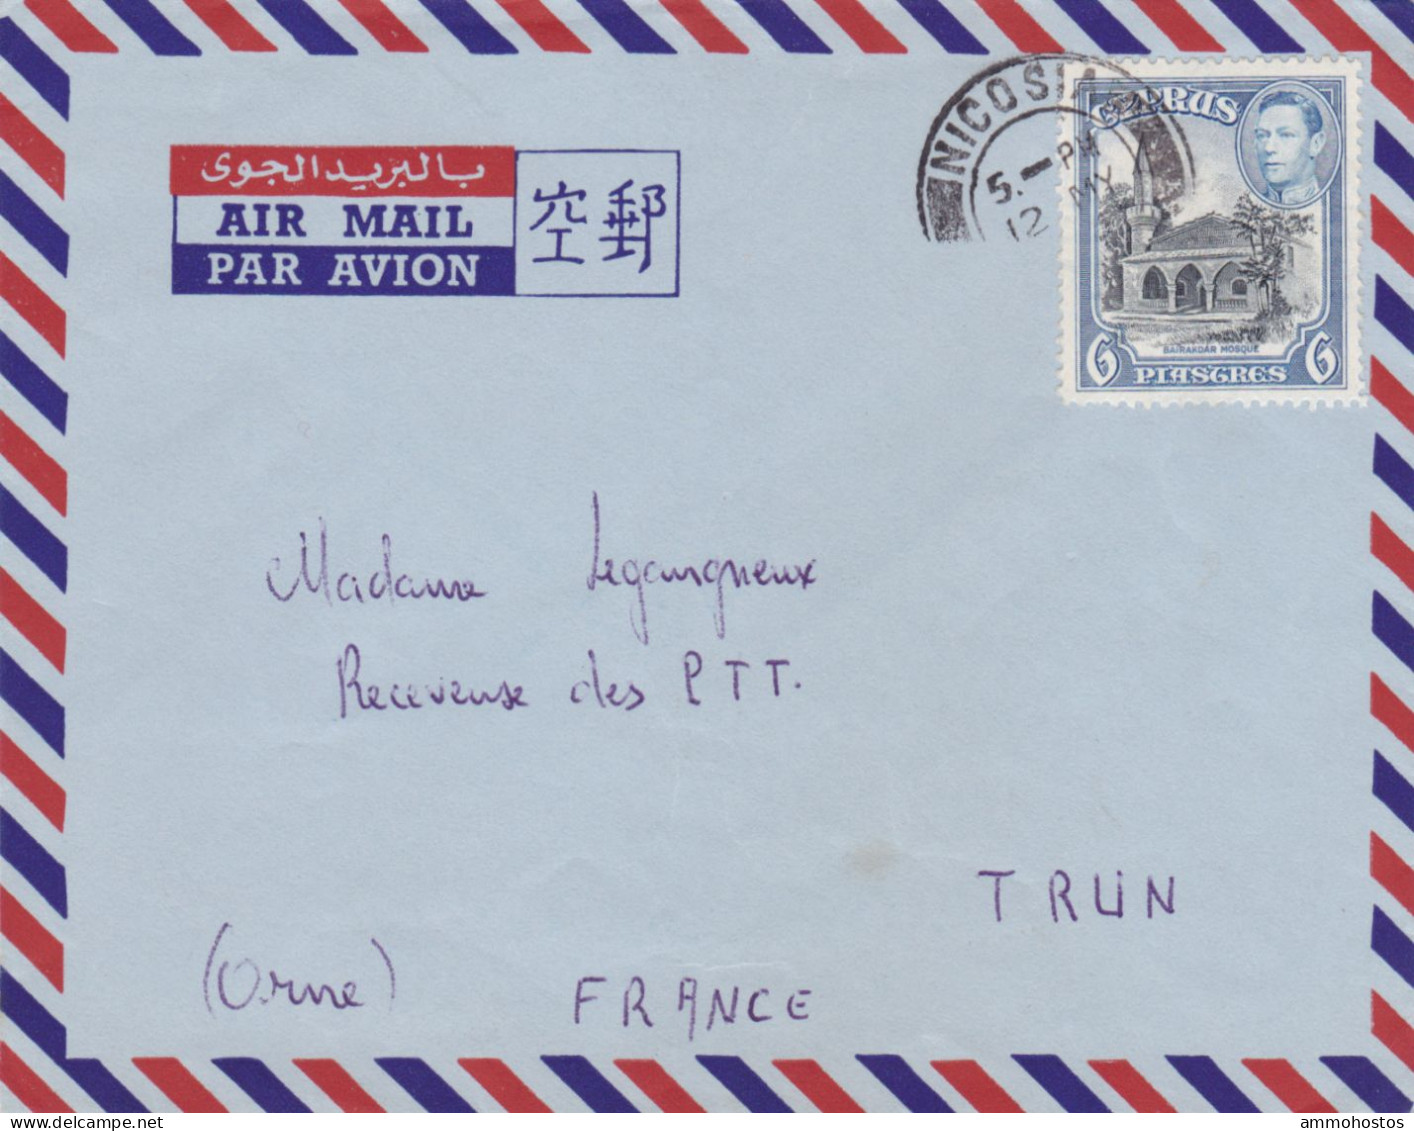 CYPRUS KGVI AIRMAIL COVER NICOSIA FRANCE 6 PIASTRE RATE - Zypern (...-1960)